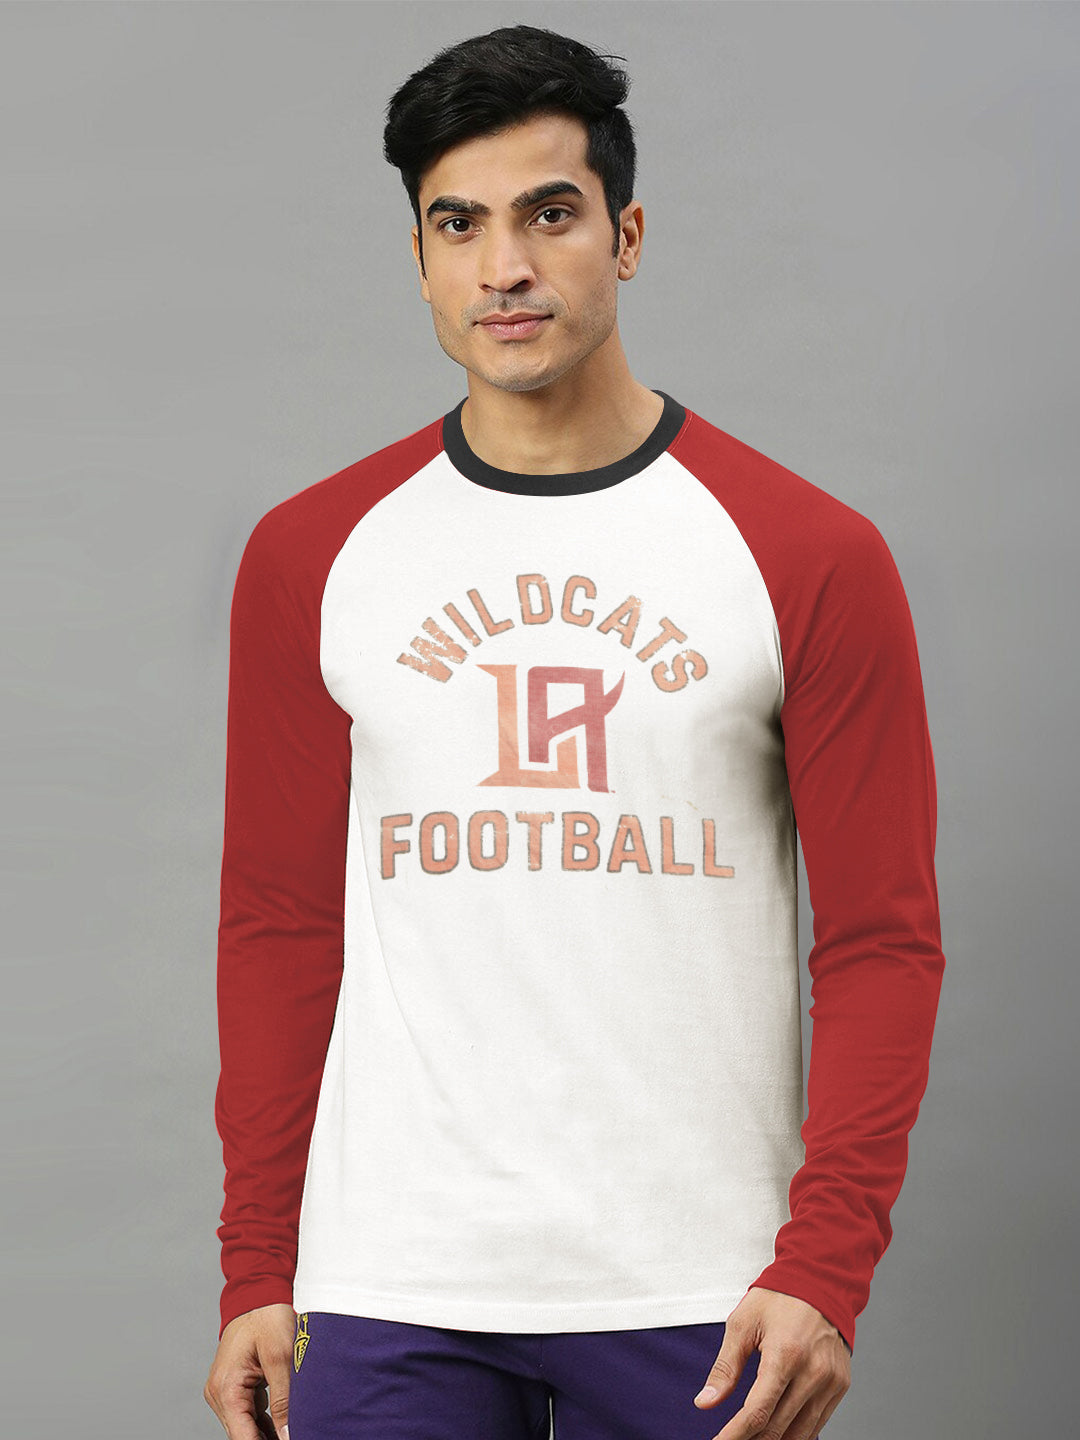 47 Raglan Sleeve Crew Neck Tee Shirt For Men-Off White & Red with Print-SP2118